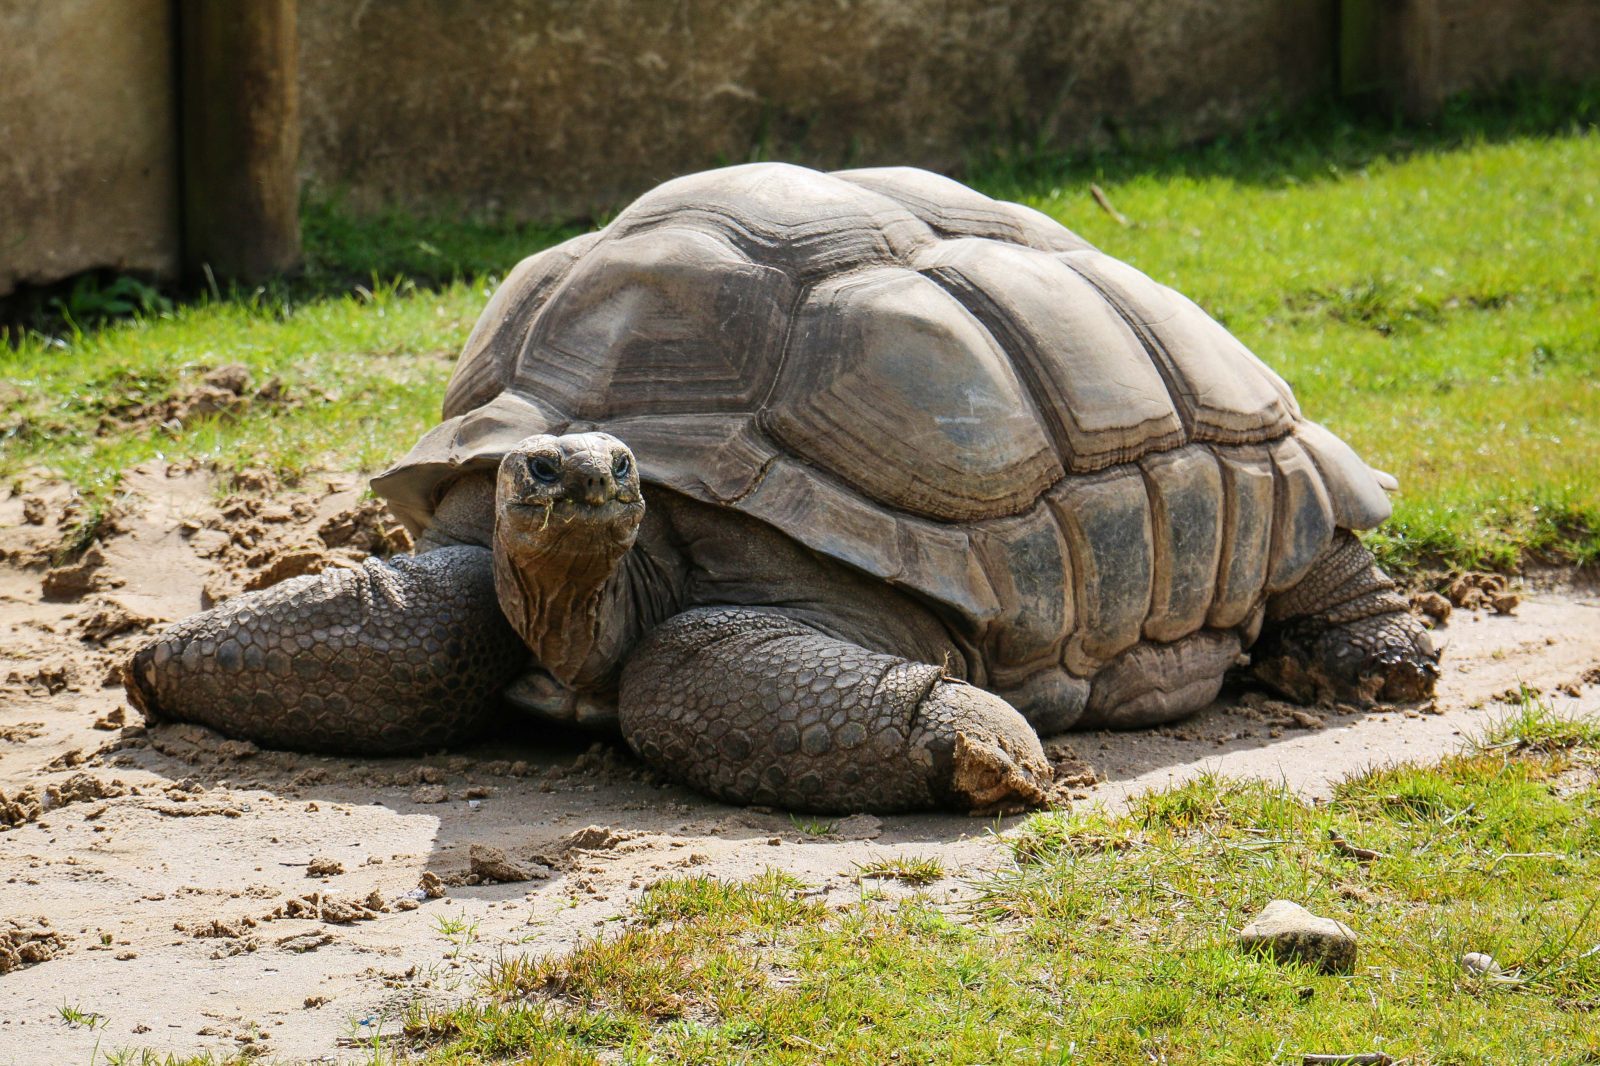 Blackpool Zoo announces death of beloved 105-year-old tortoise, The Manc